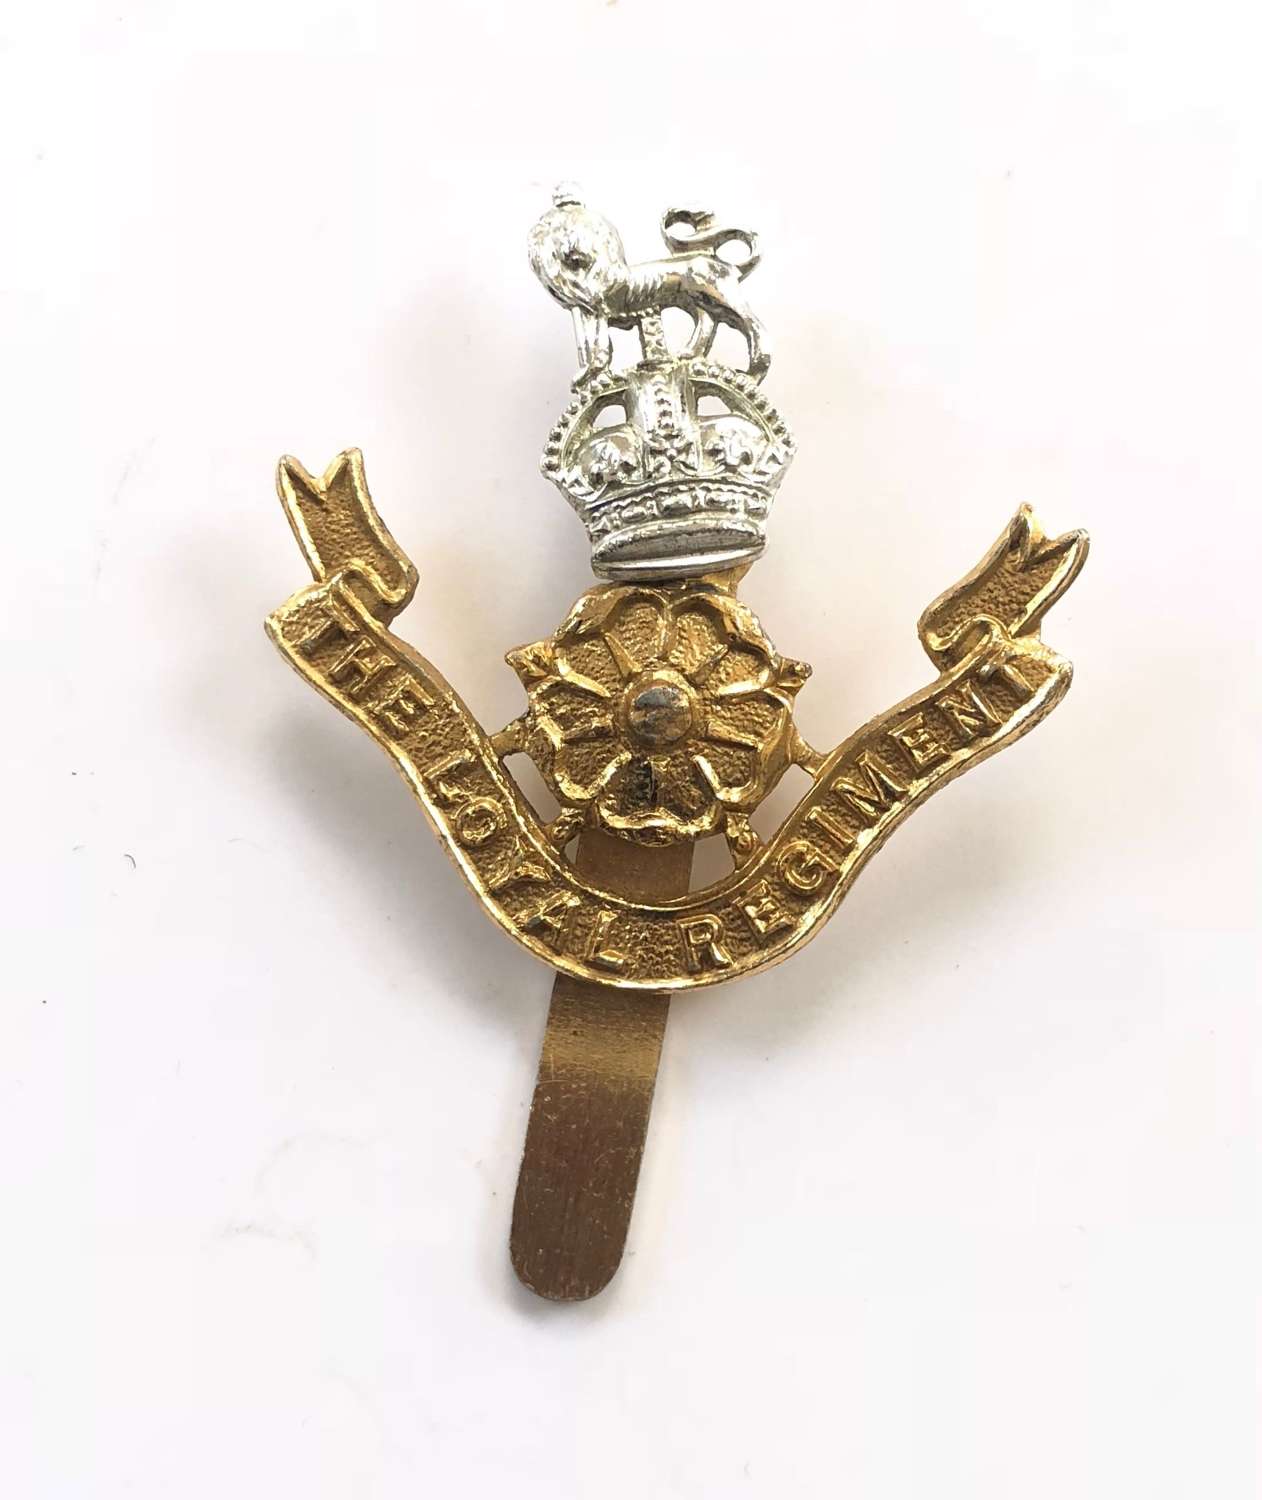 The Loyal Regiment King’s Crown anodised cap badge.